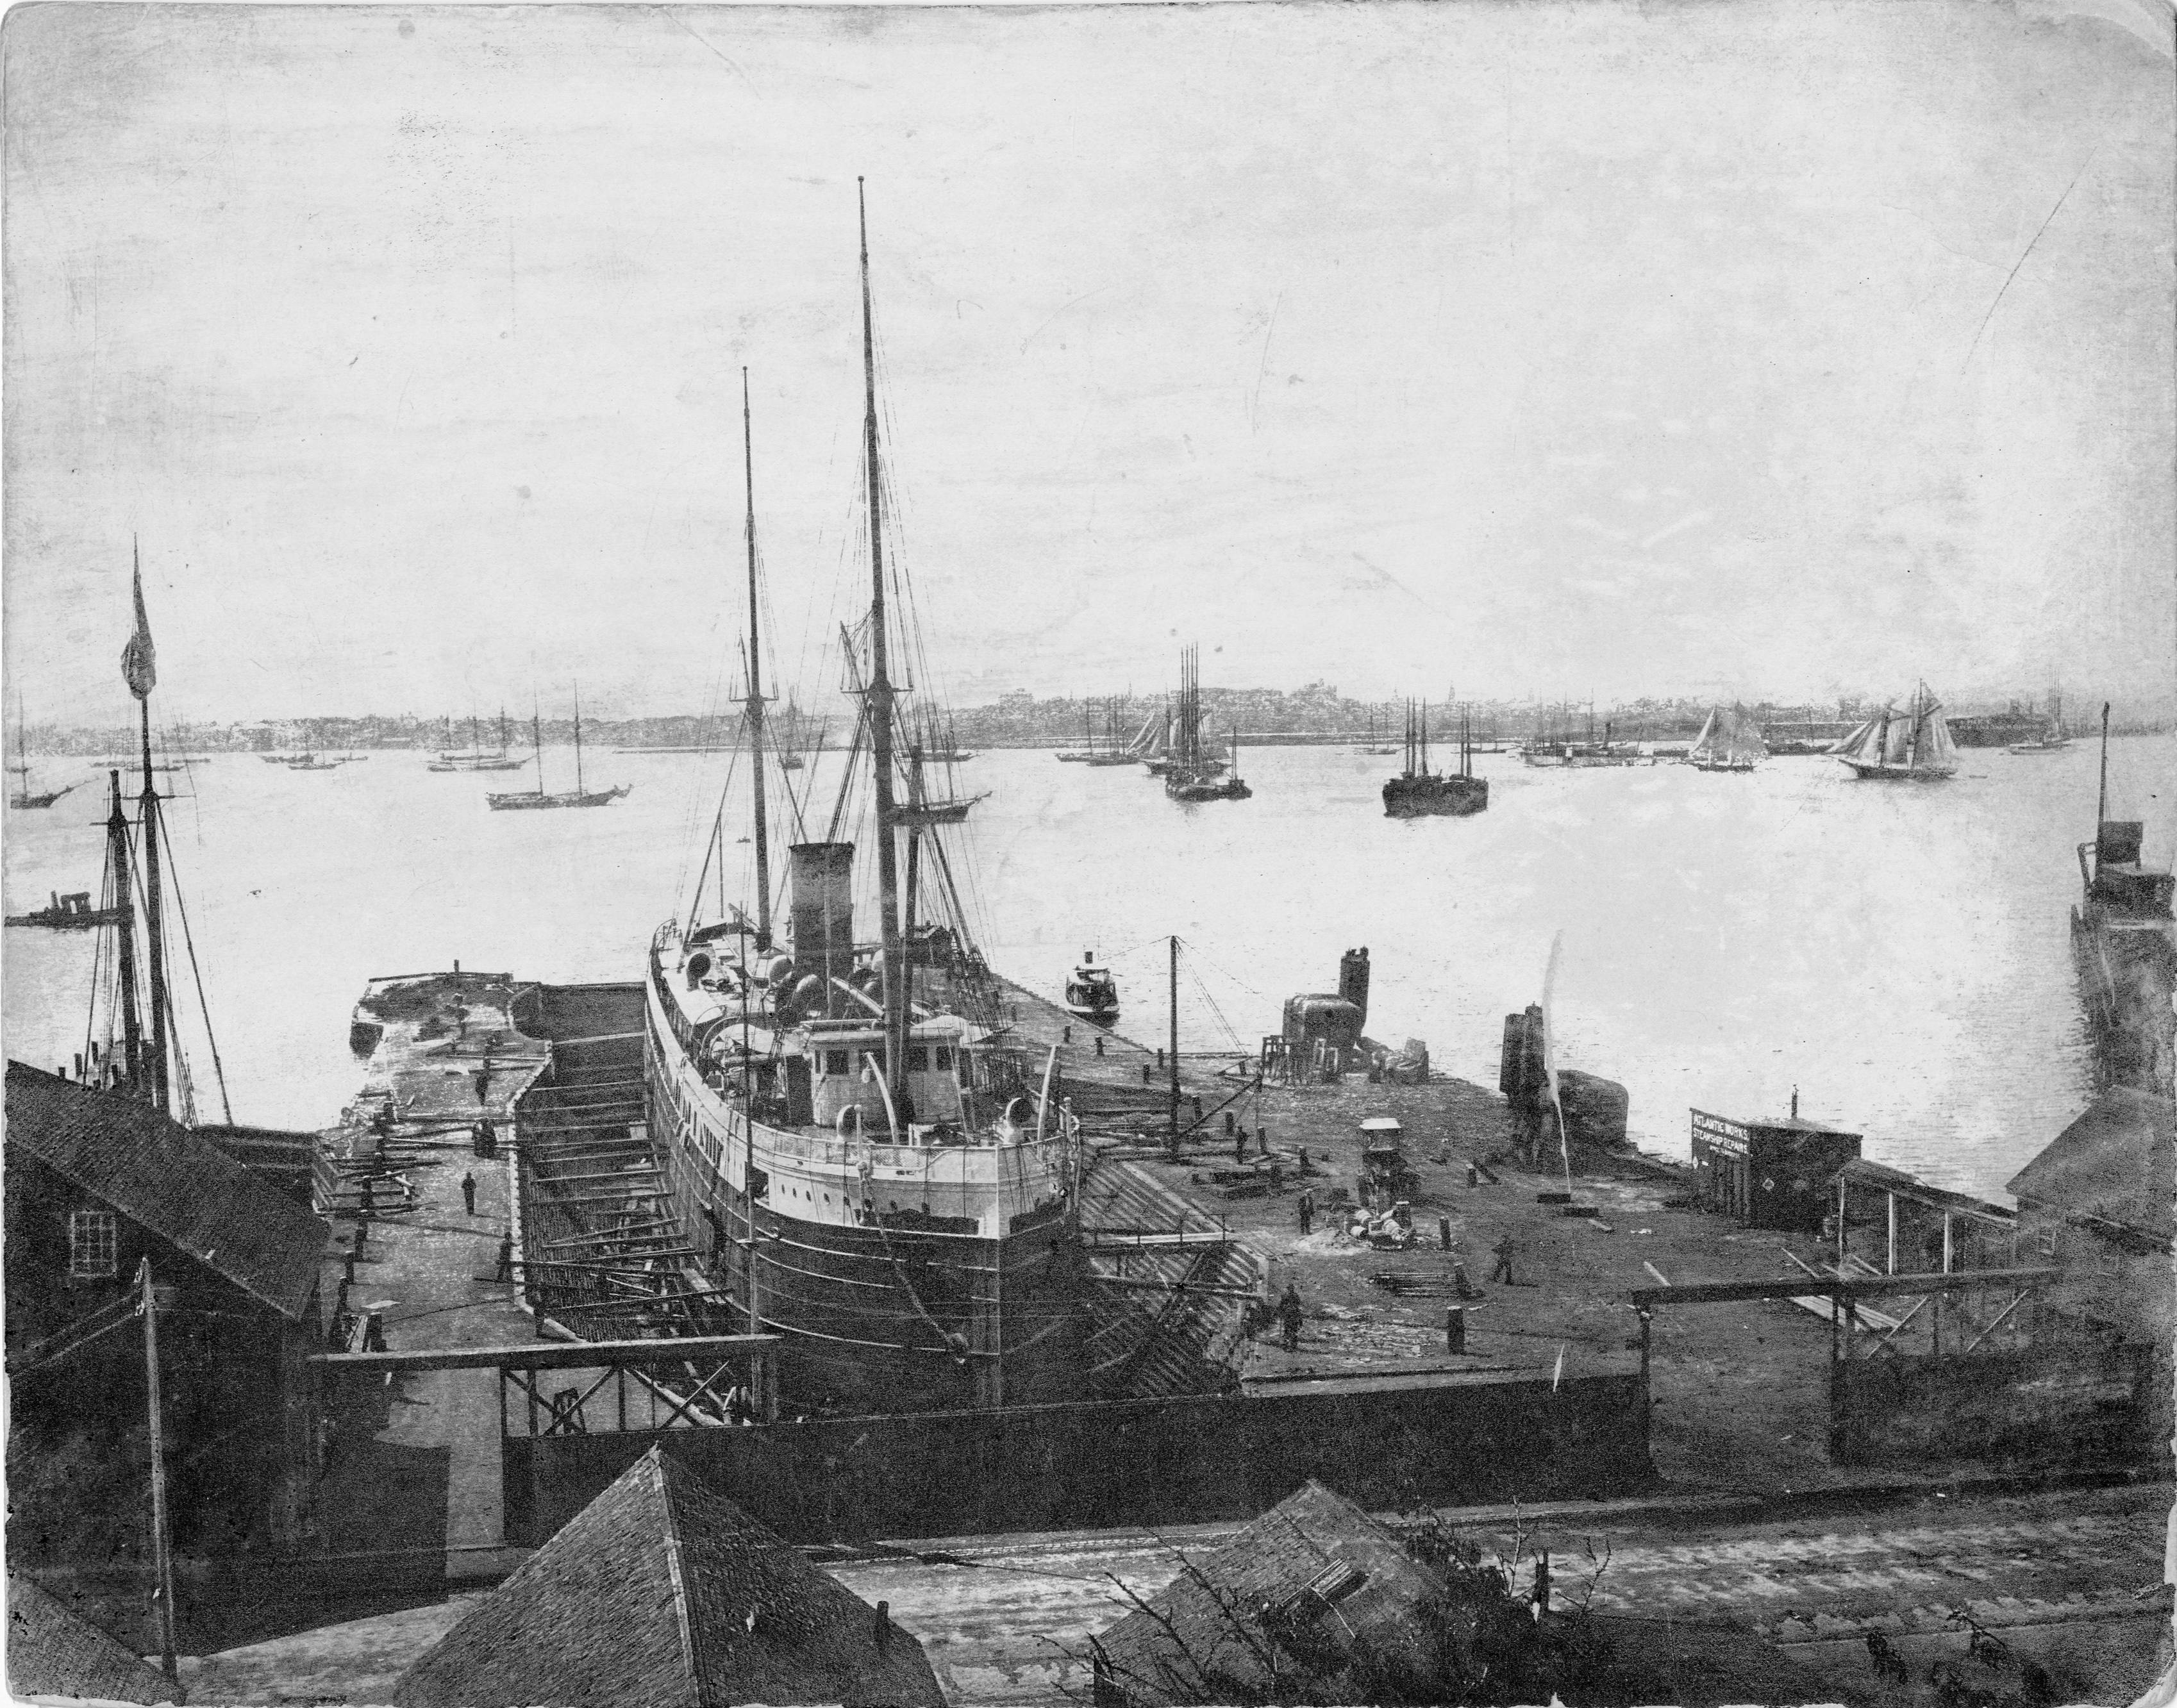 photograph of ship under construction from Atlantic Works collection